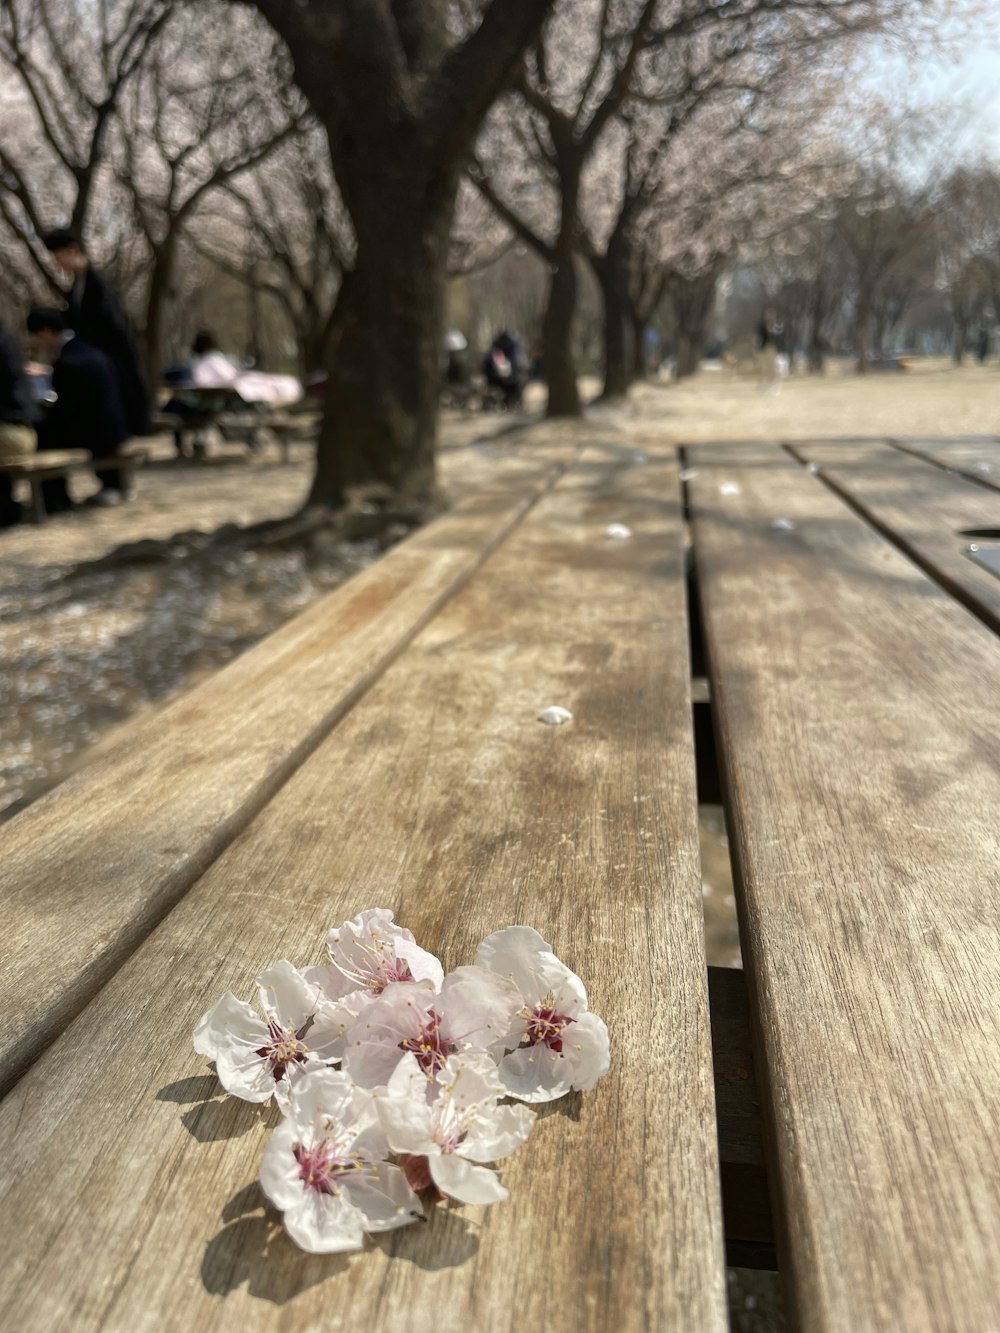 a flower is sitting on a wooden bench